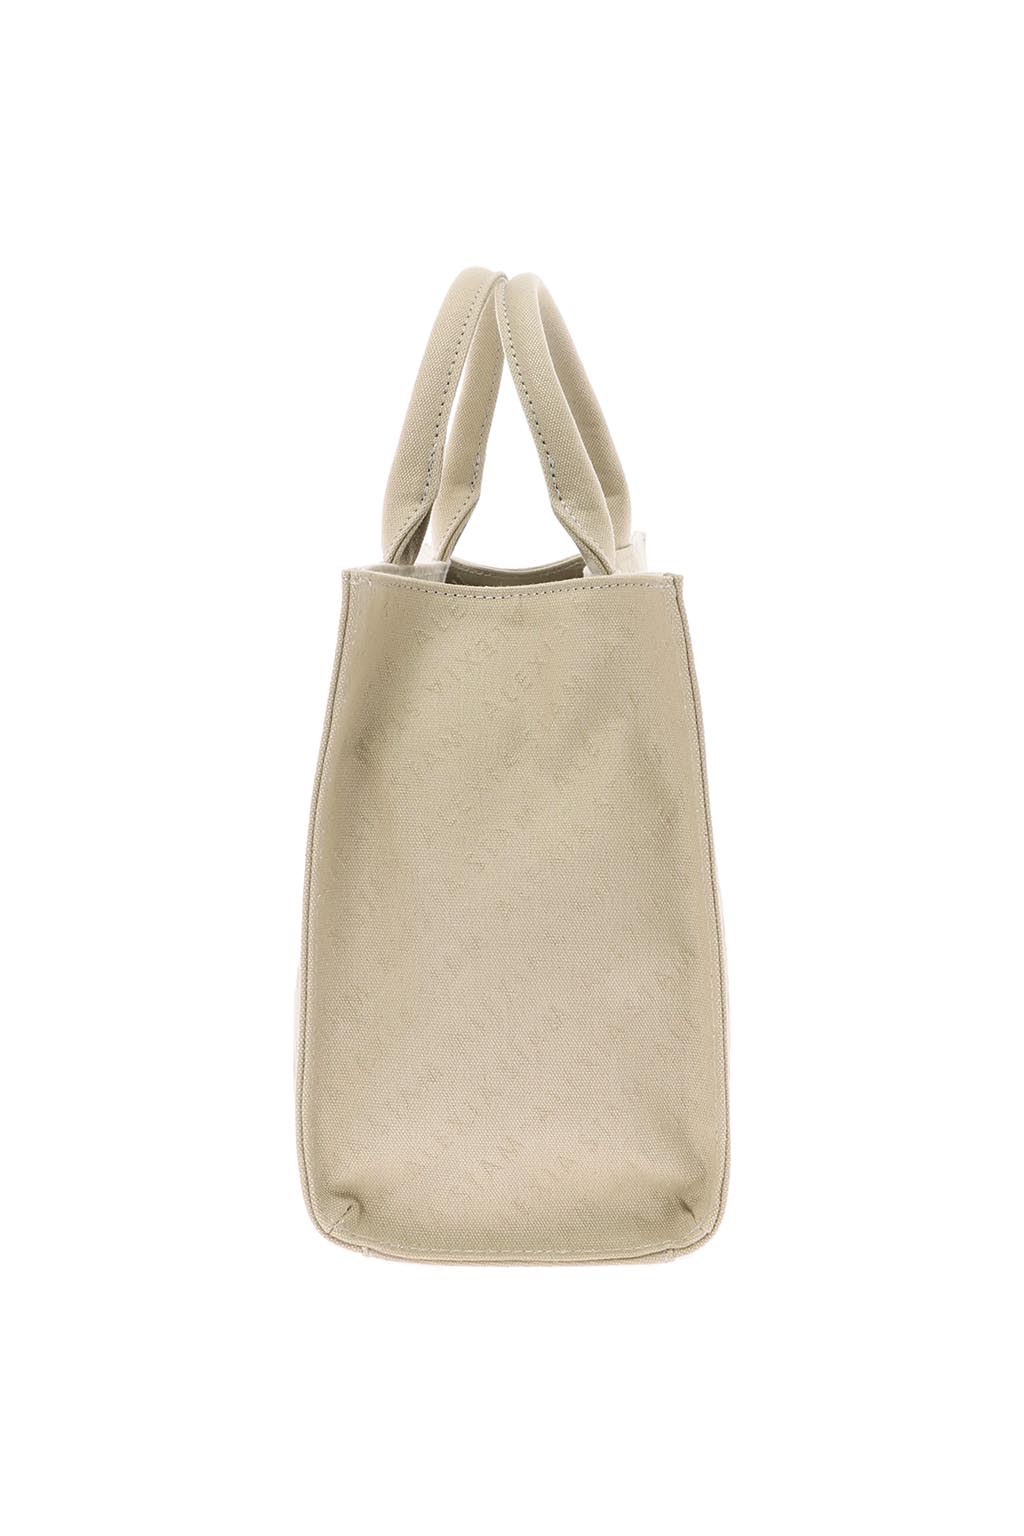 embossed-logo-square-small-tote-bag-beige-10